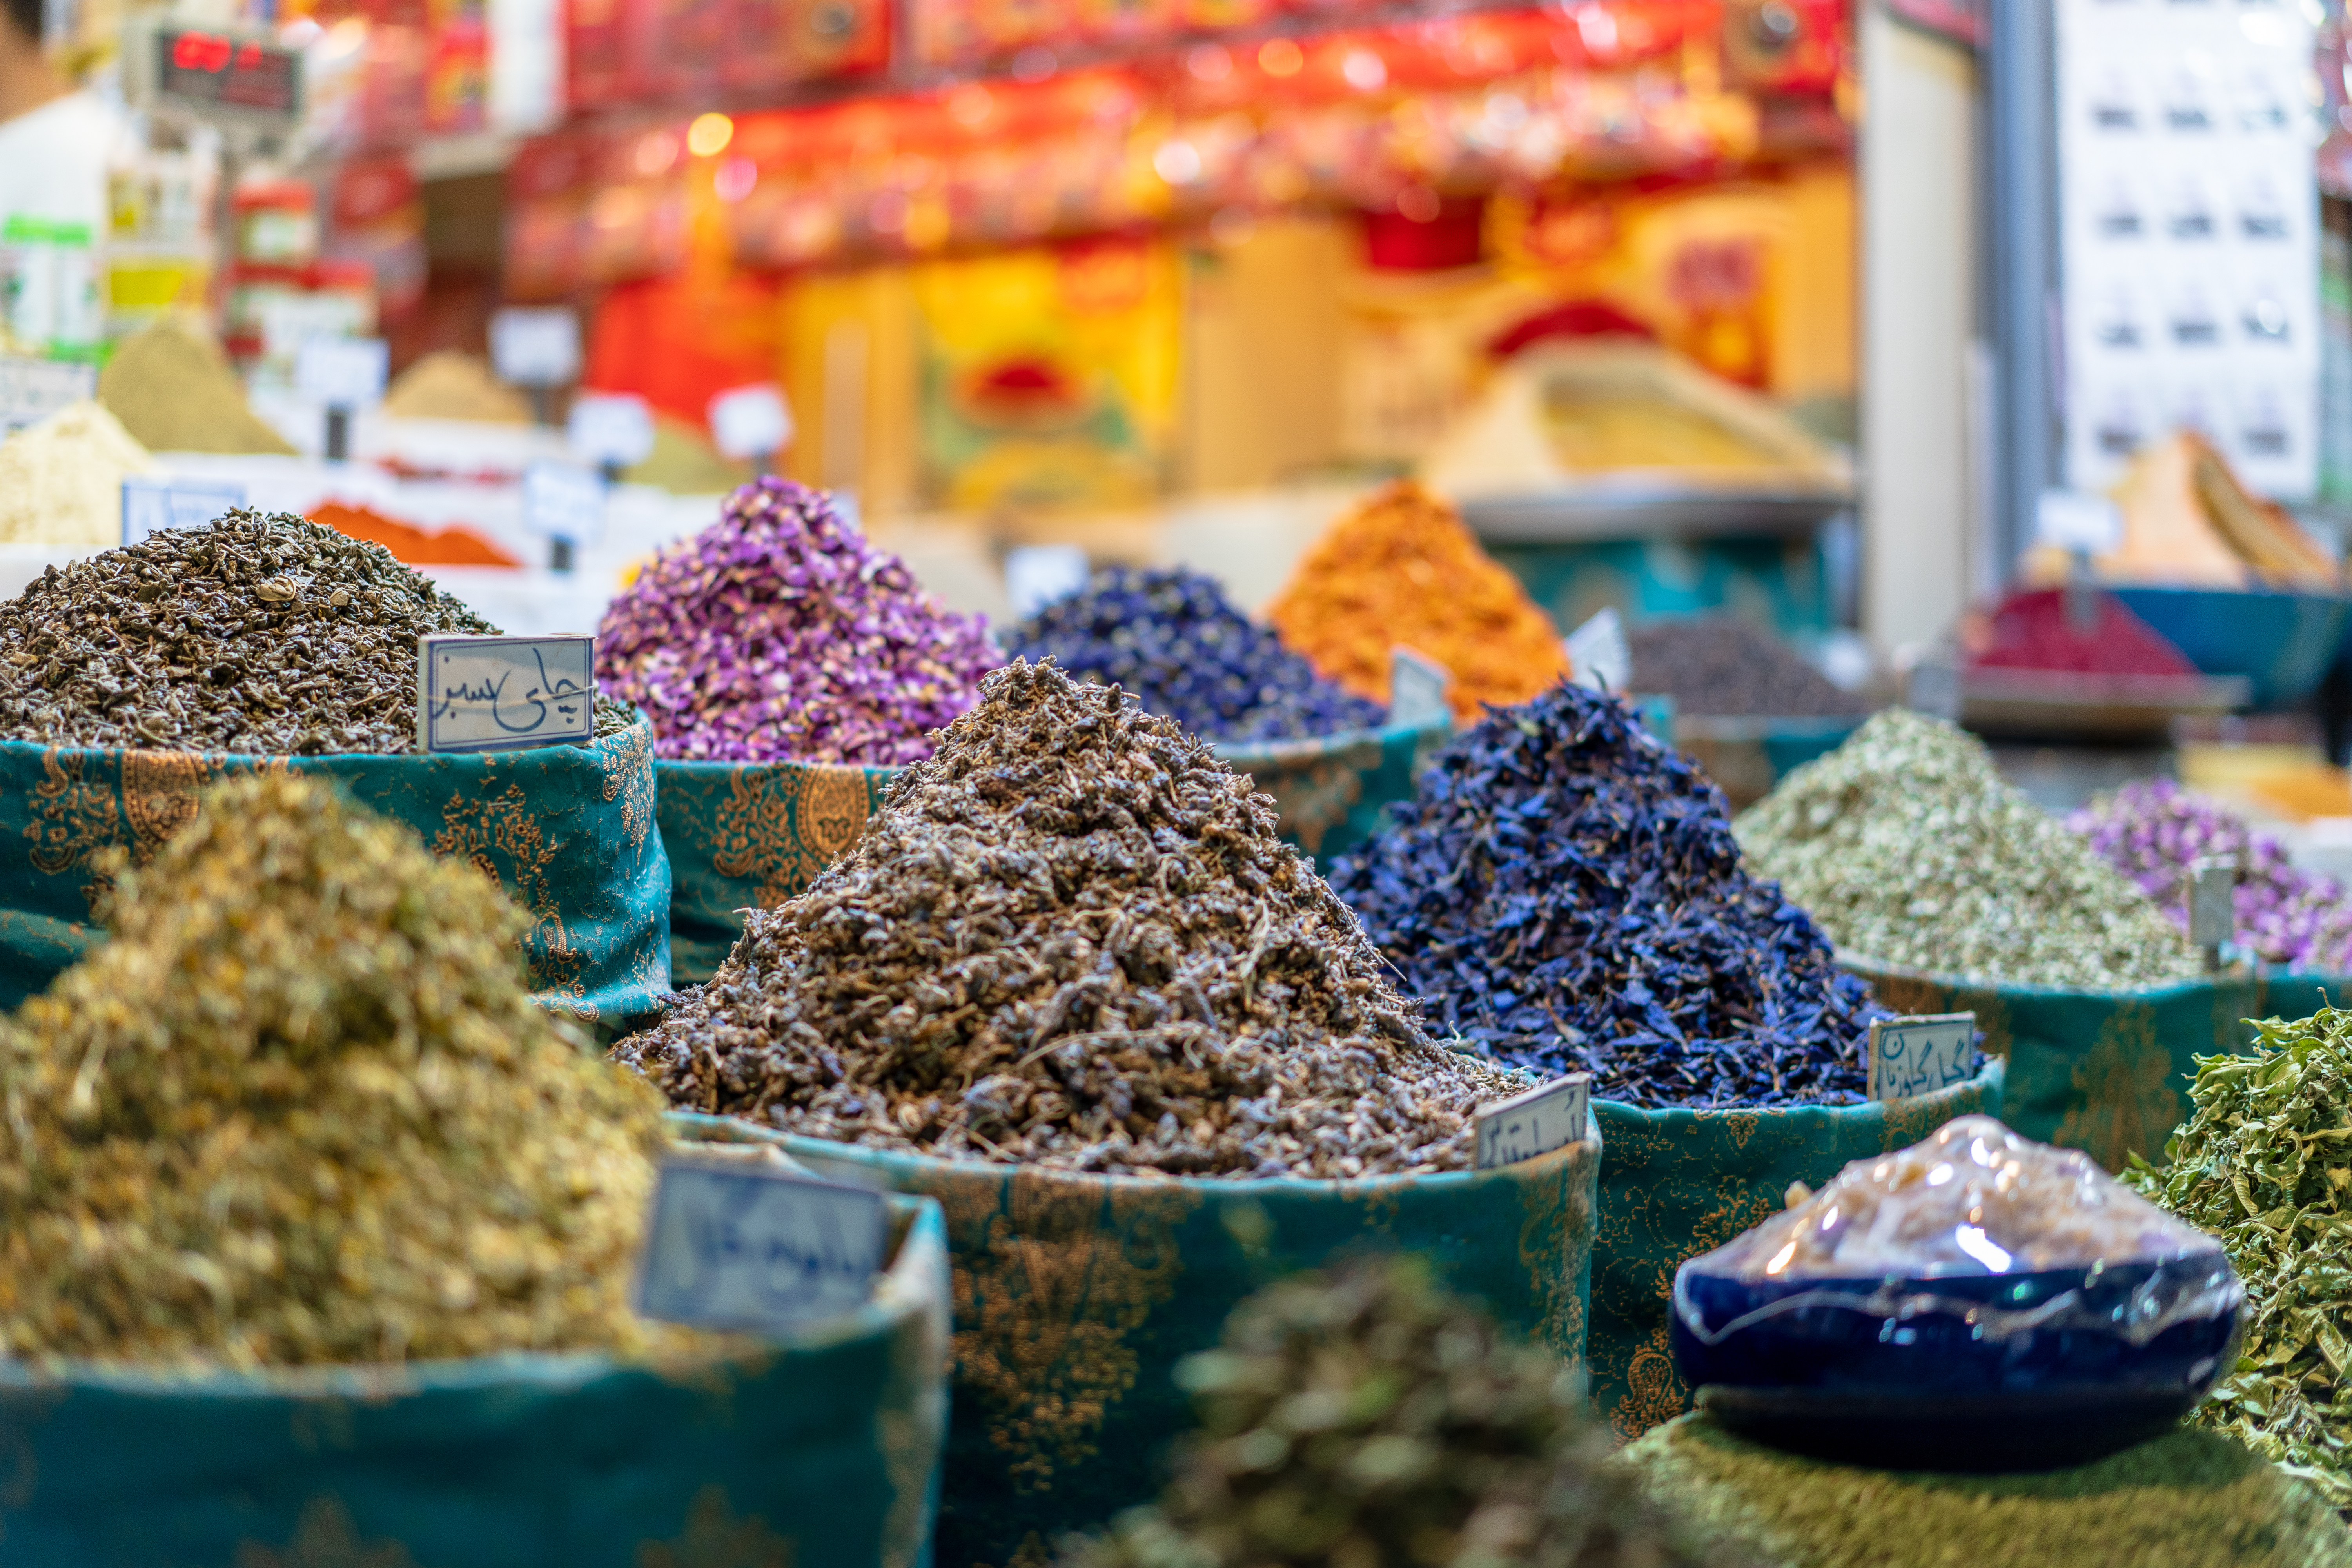 A wide variety of spices can be purchased at the Grand Bazaar – © Mat Deo / Shutterstock